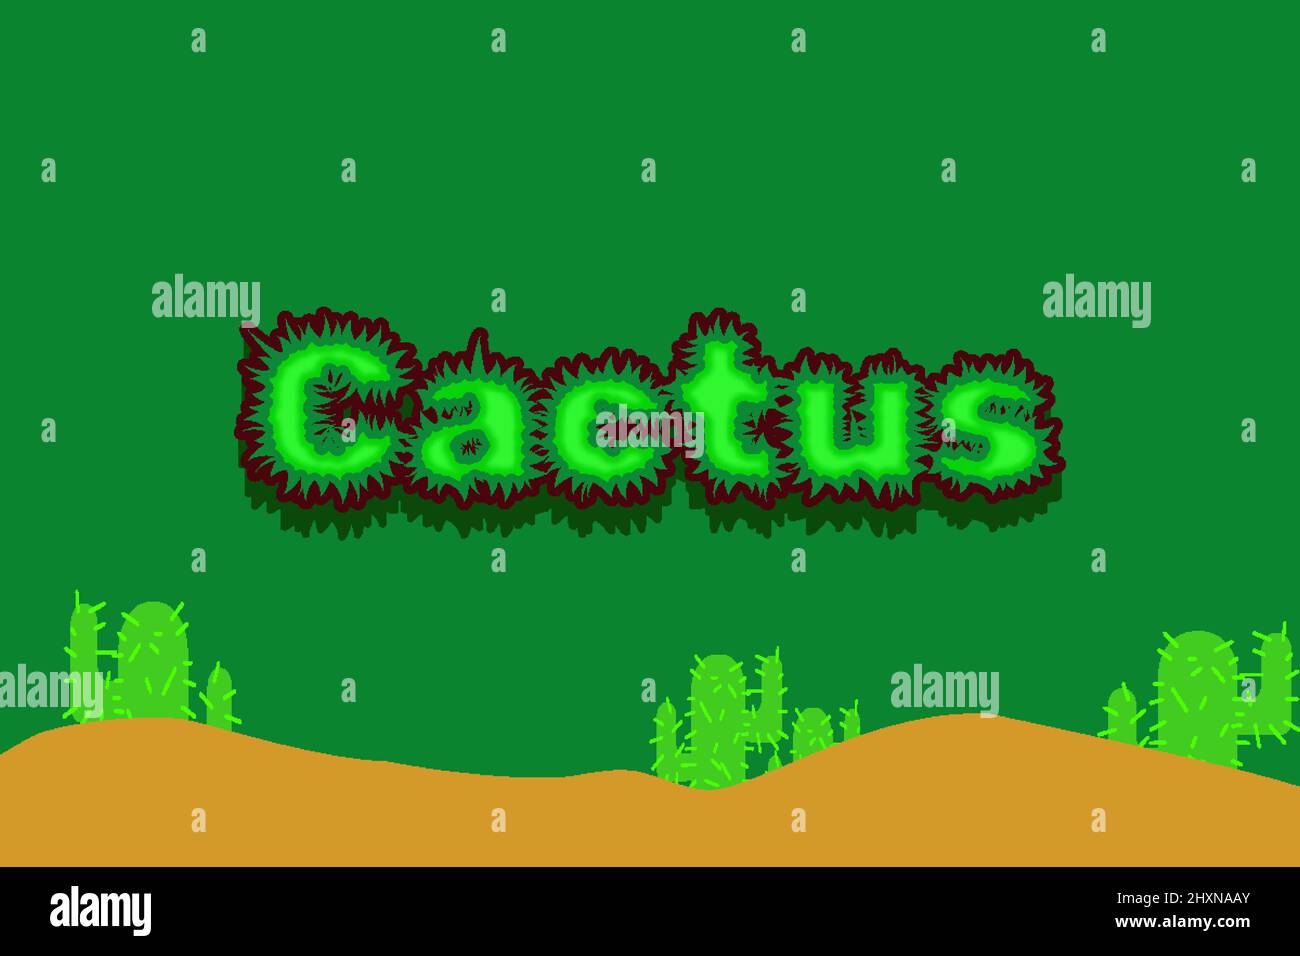 Editable text effects Cactus , words and font can be changed Stock Vector